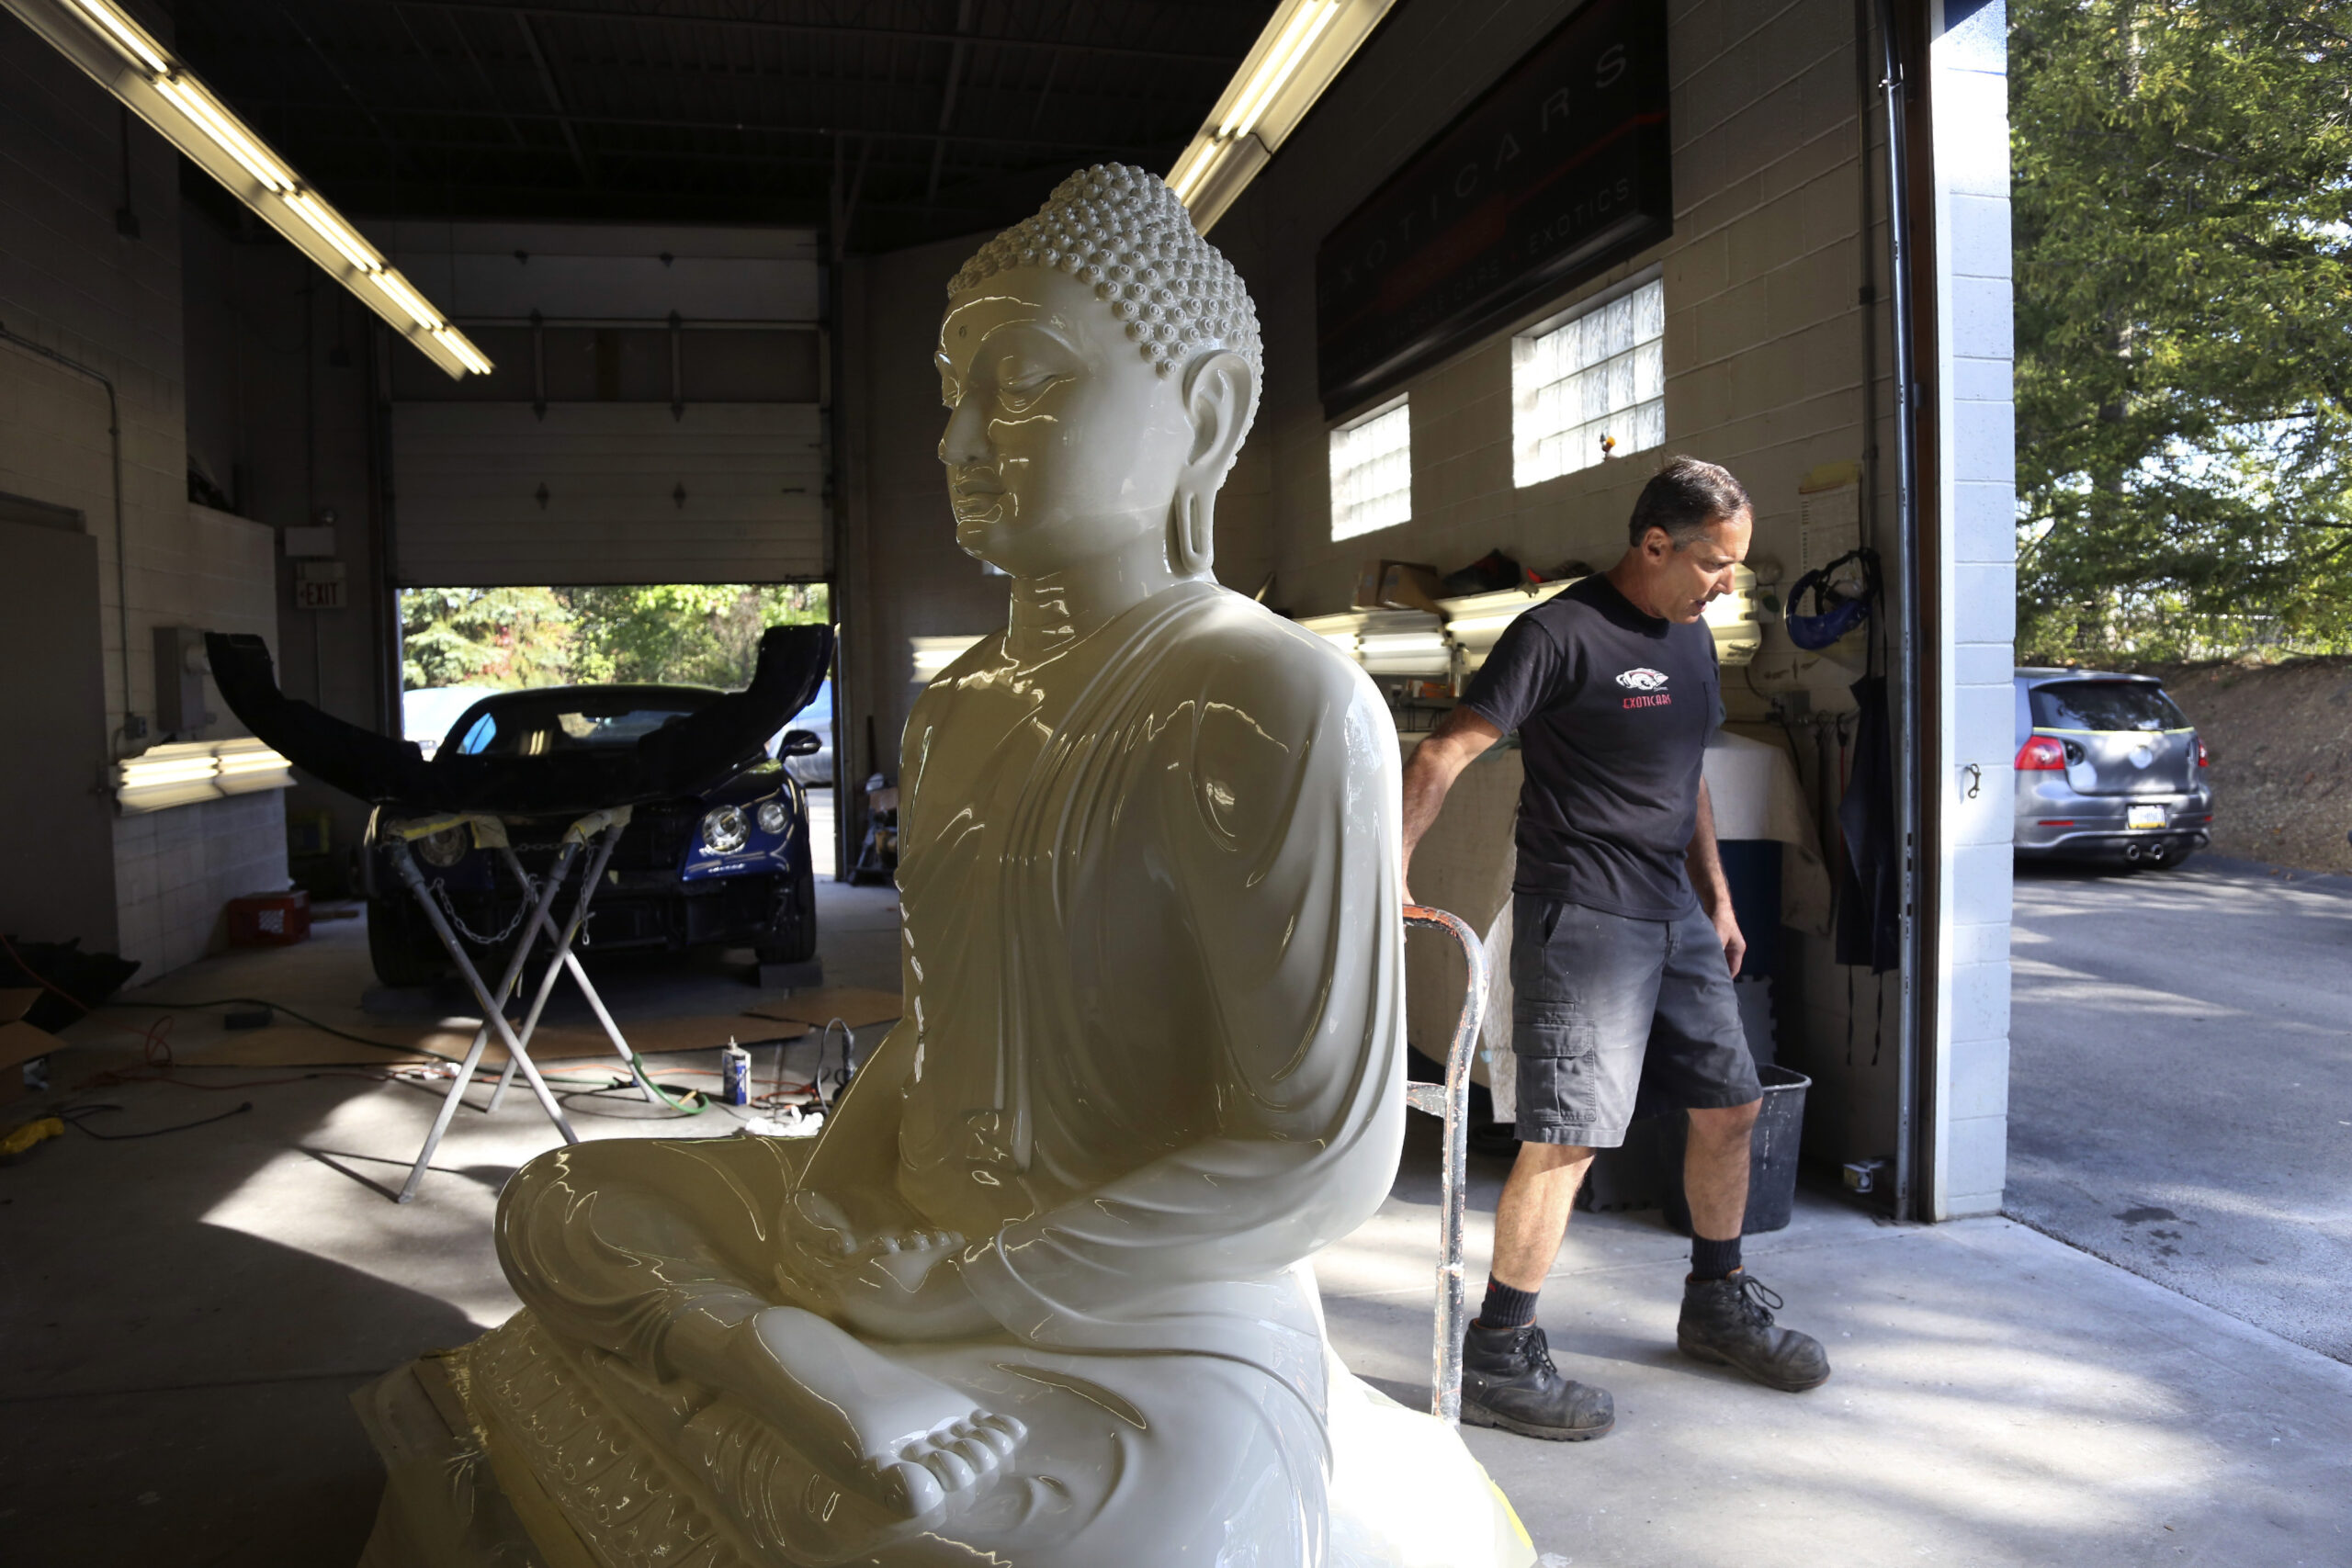 Dave Ley, co-owner of Exoticars, an auto restoration shop specializing in classic vehicles, pulls a restored statue of the Buddha outside in McCandless, Pa., on Monday, Oct. 11, 2021. Workers repaired and repainted the figure for the Pittsburgh Buddhist Center, which brought it from Sri Lanka over 15 years ago. (AP Photo/Jessie Wardarski)